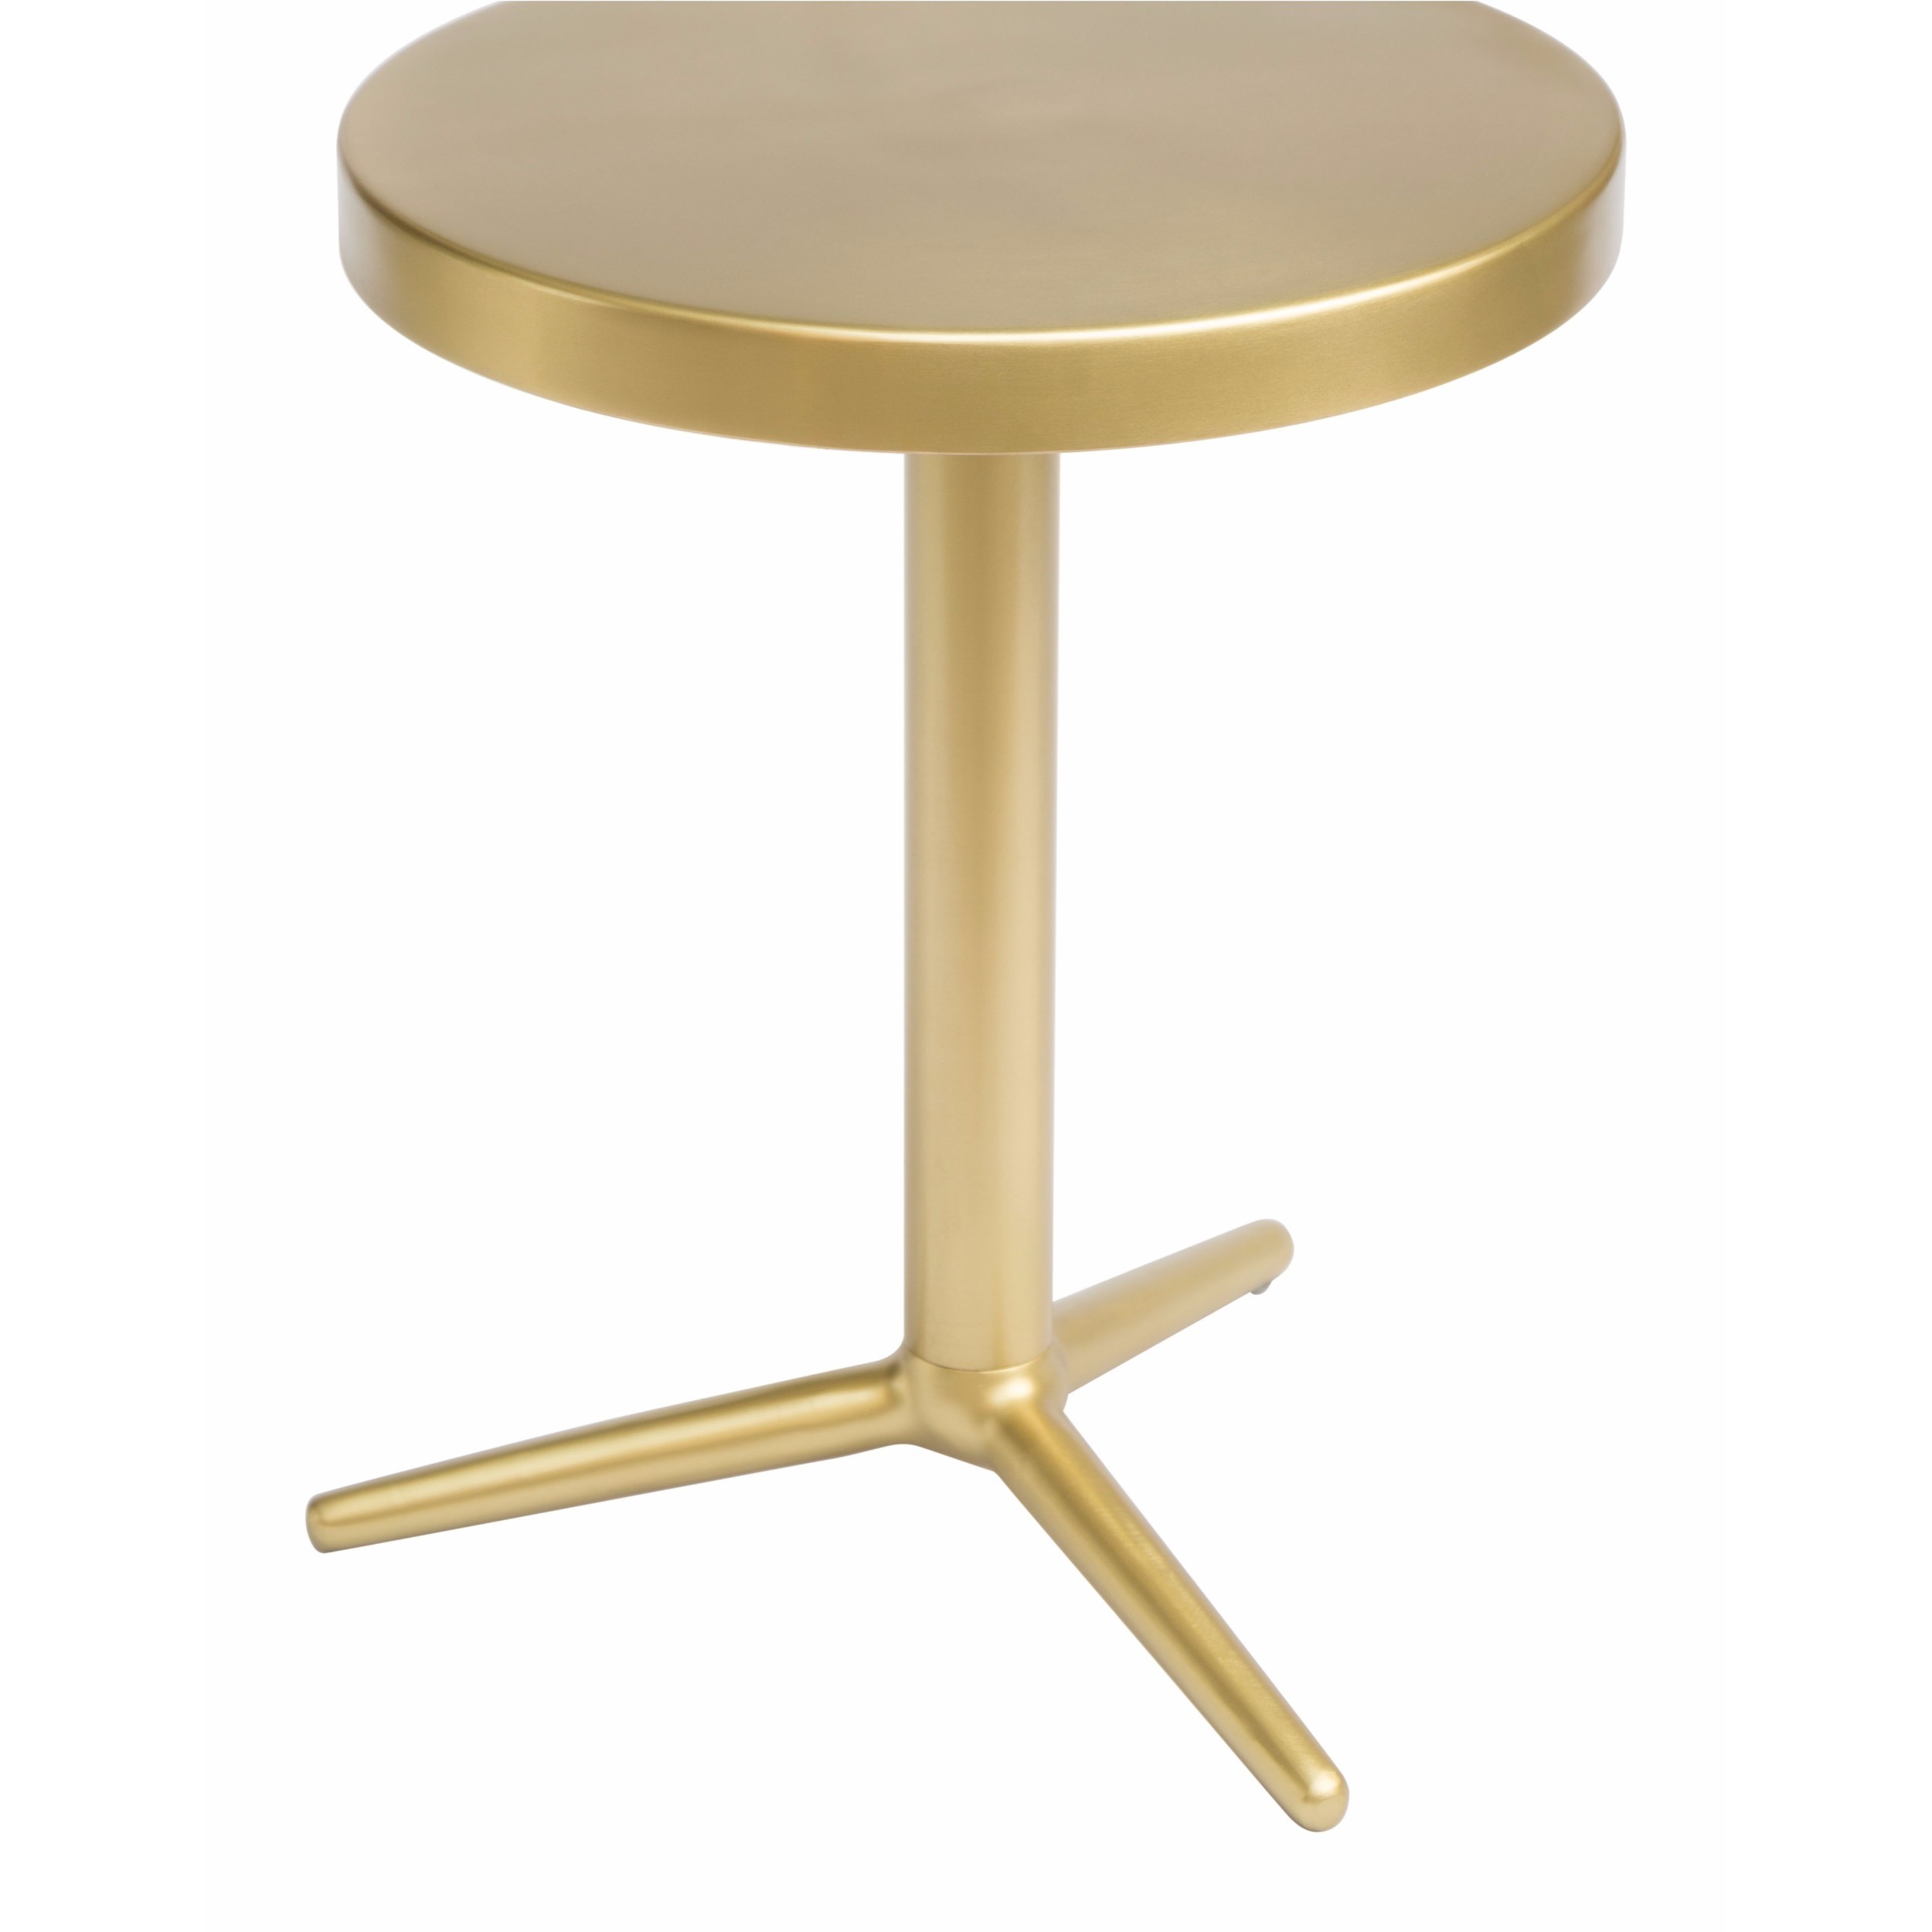 derby accent table brass zuo modern furniture pedestal small round metal patio pier one counter stools ornaments light shades decorative storage waterproof phone pouch target